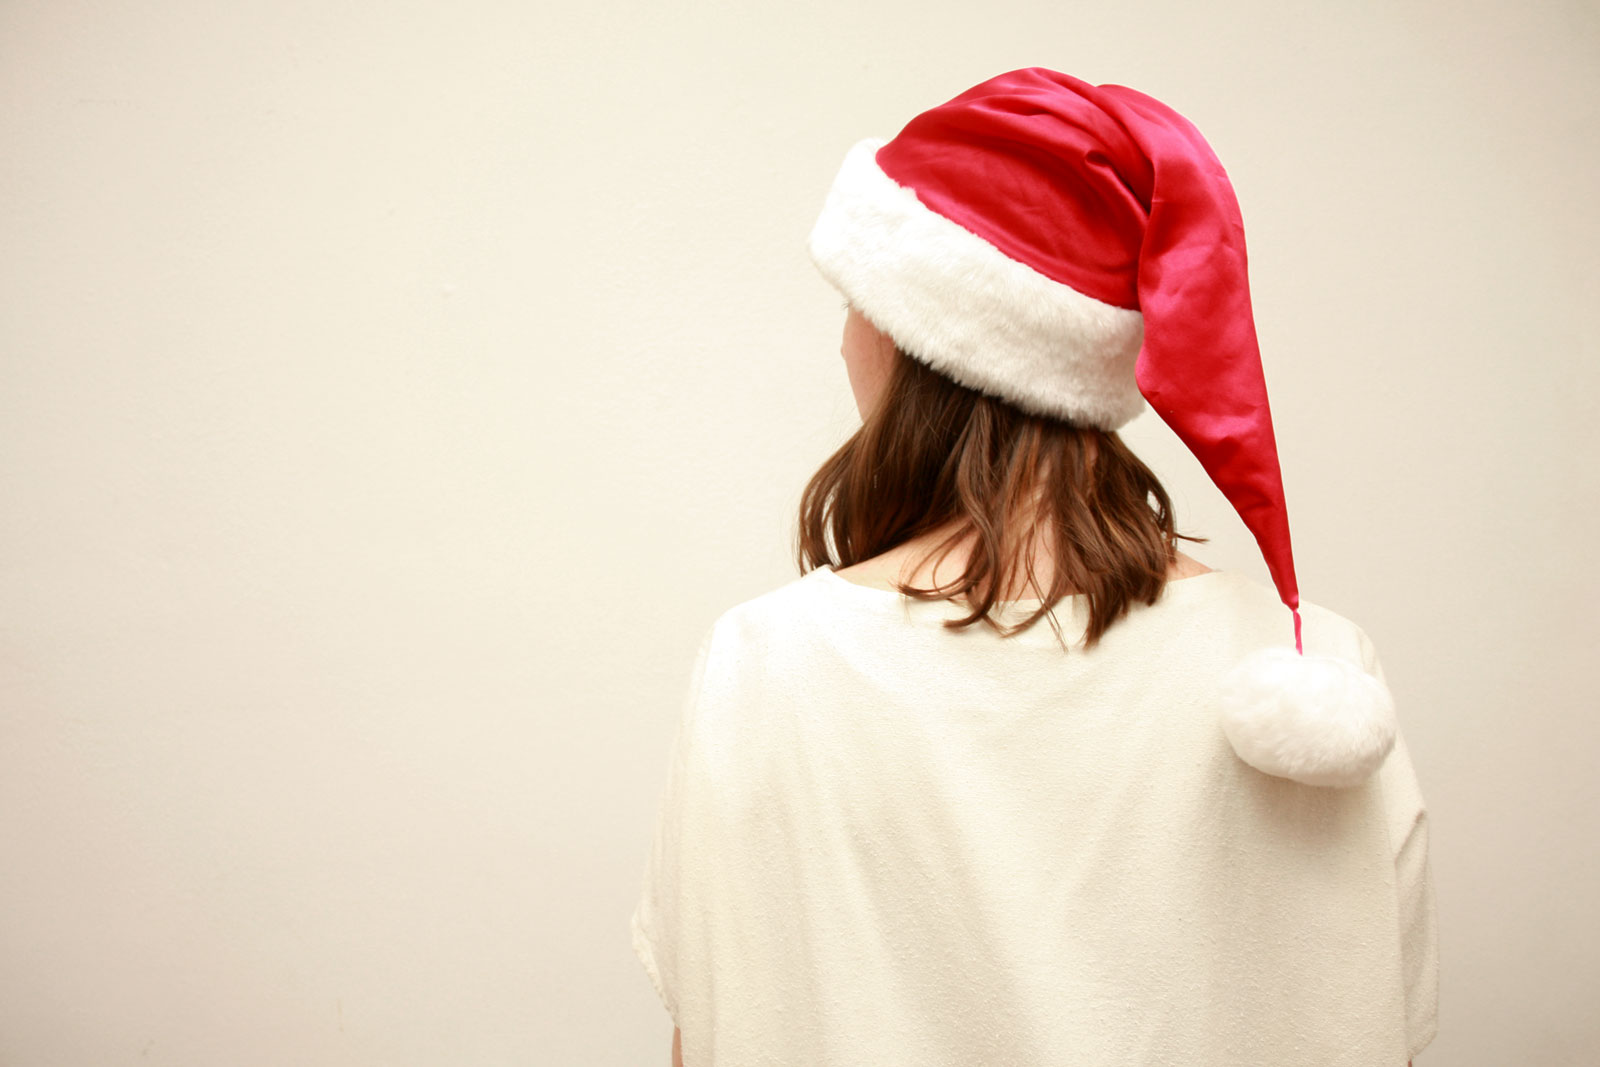 Alyssa wears a white top and a red Santa hat while facing away from the camera